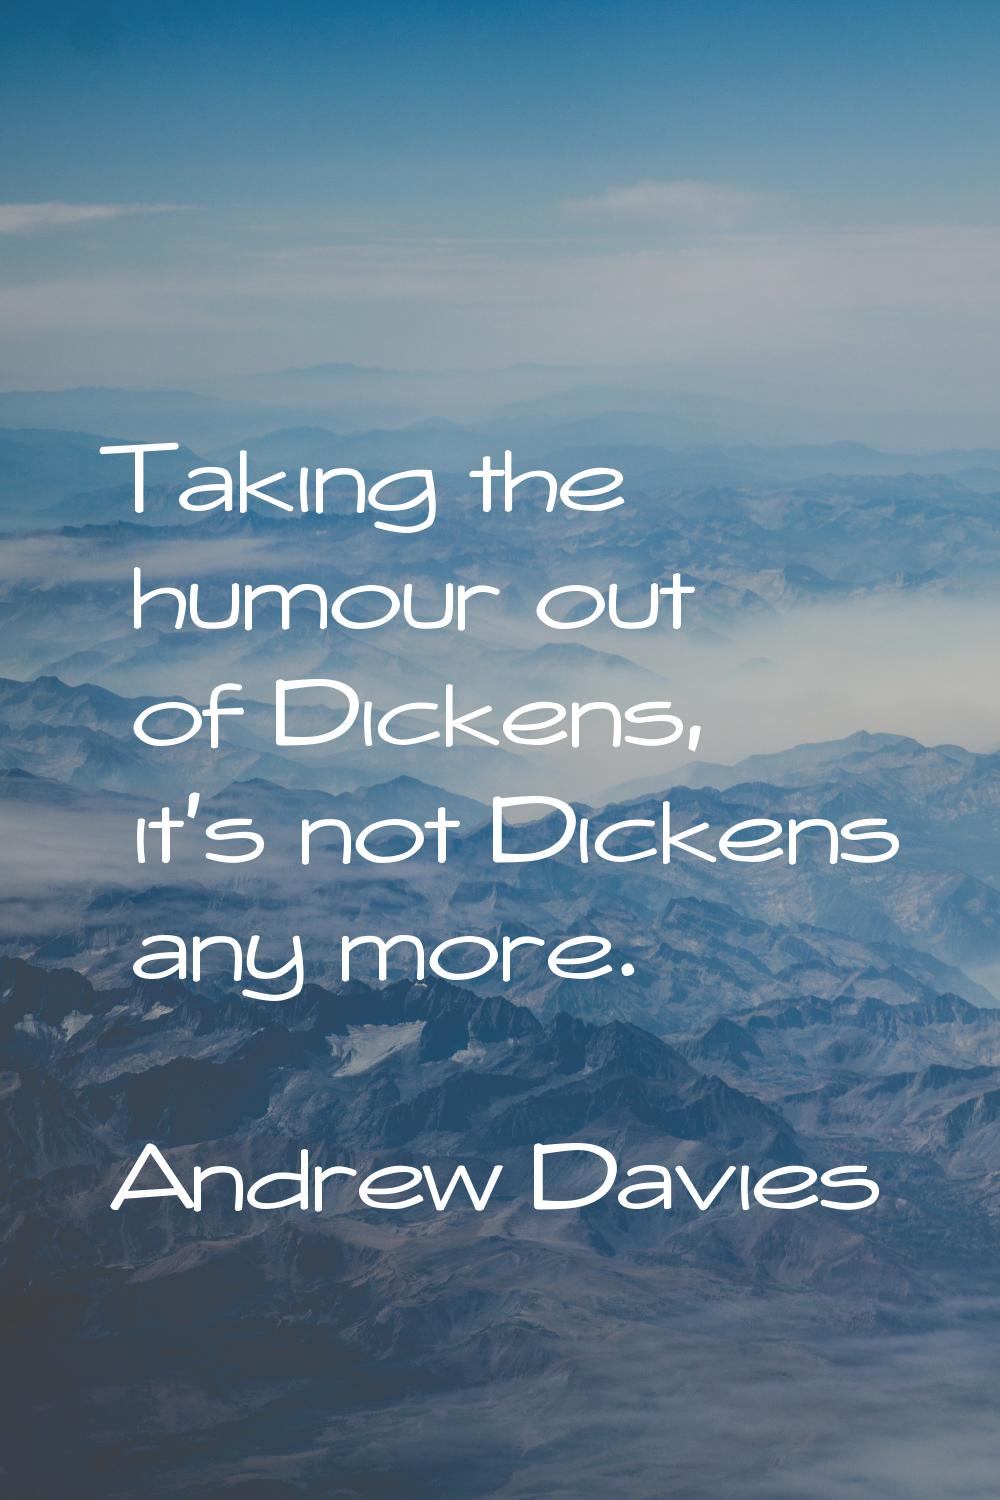 Taking the humour out of Dickens, it's not Dickens any more.